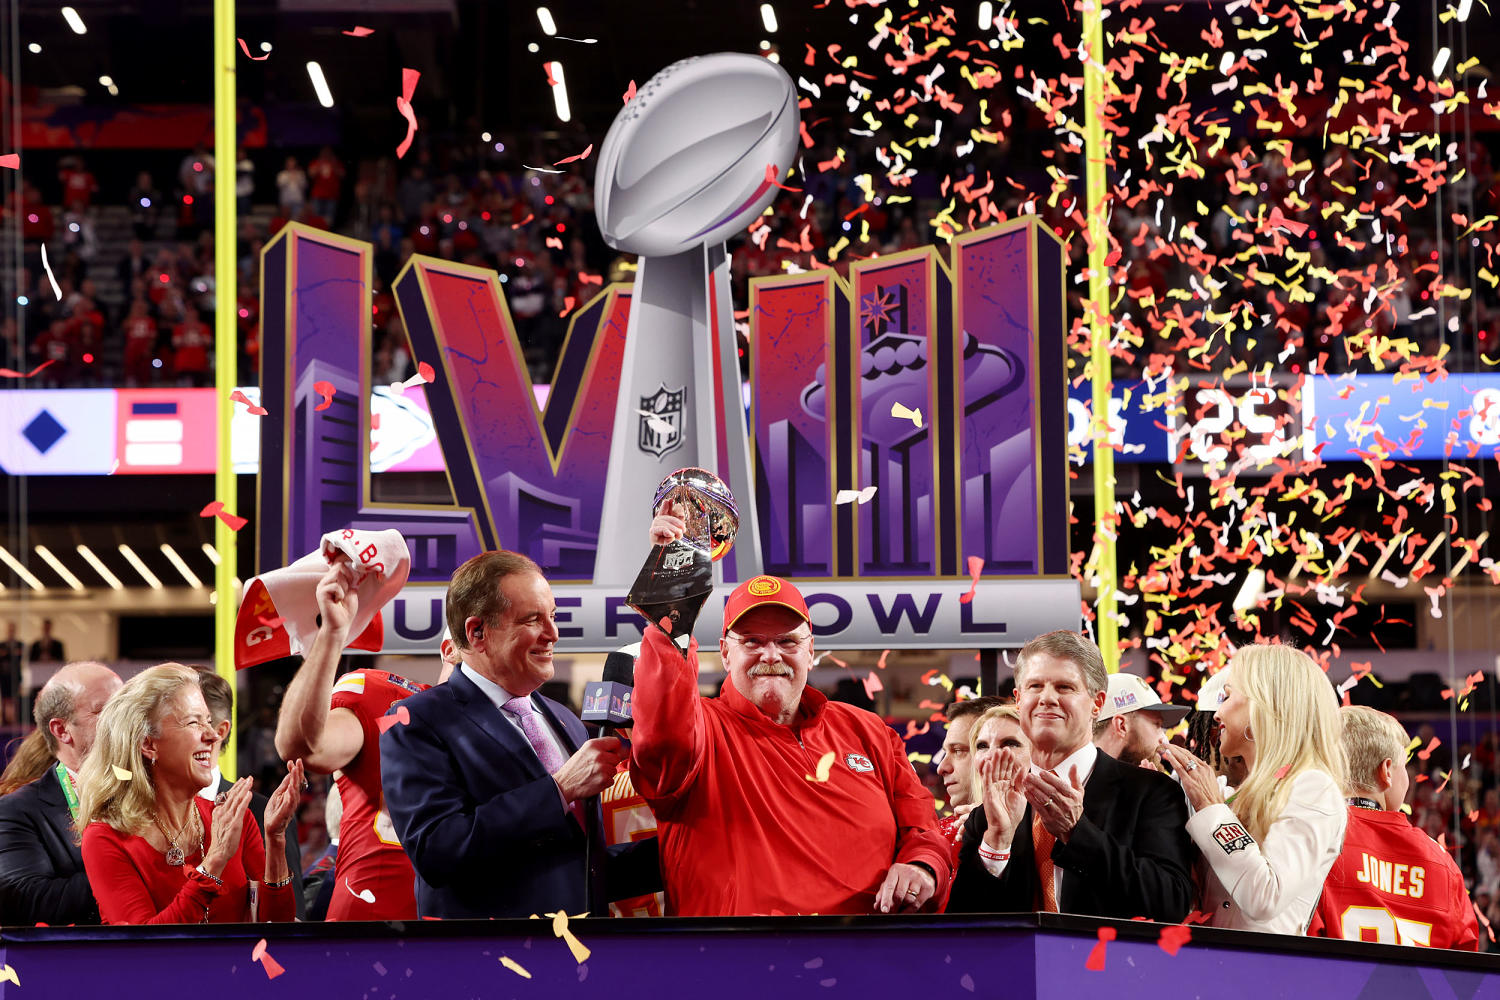 Super Bowl breaks all-time TV records with 123.4 million viewers